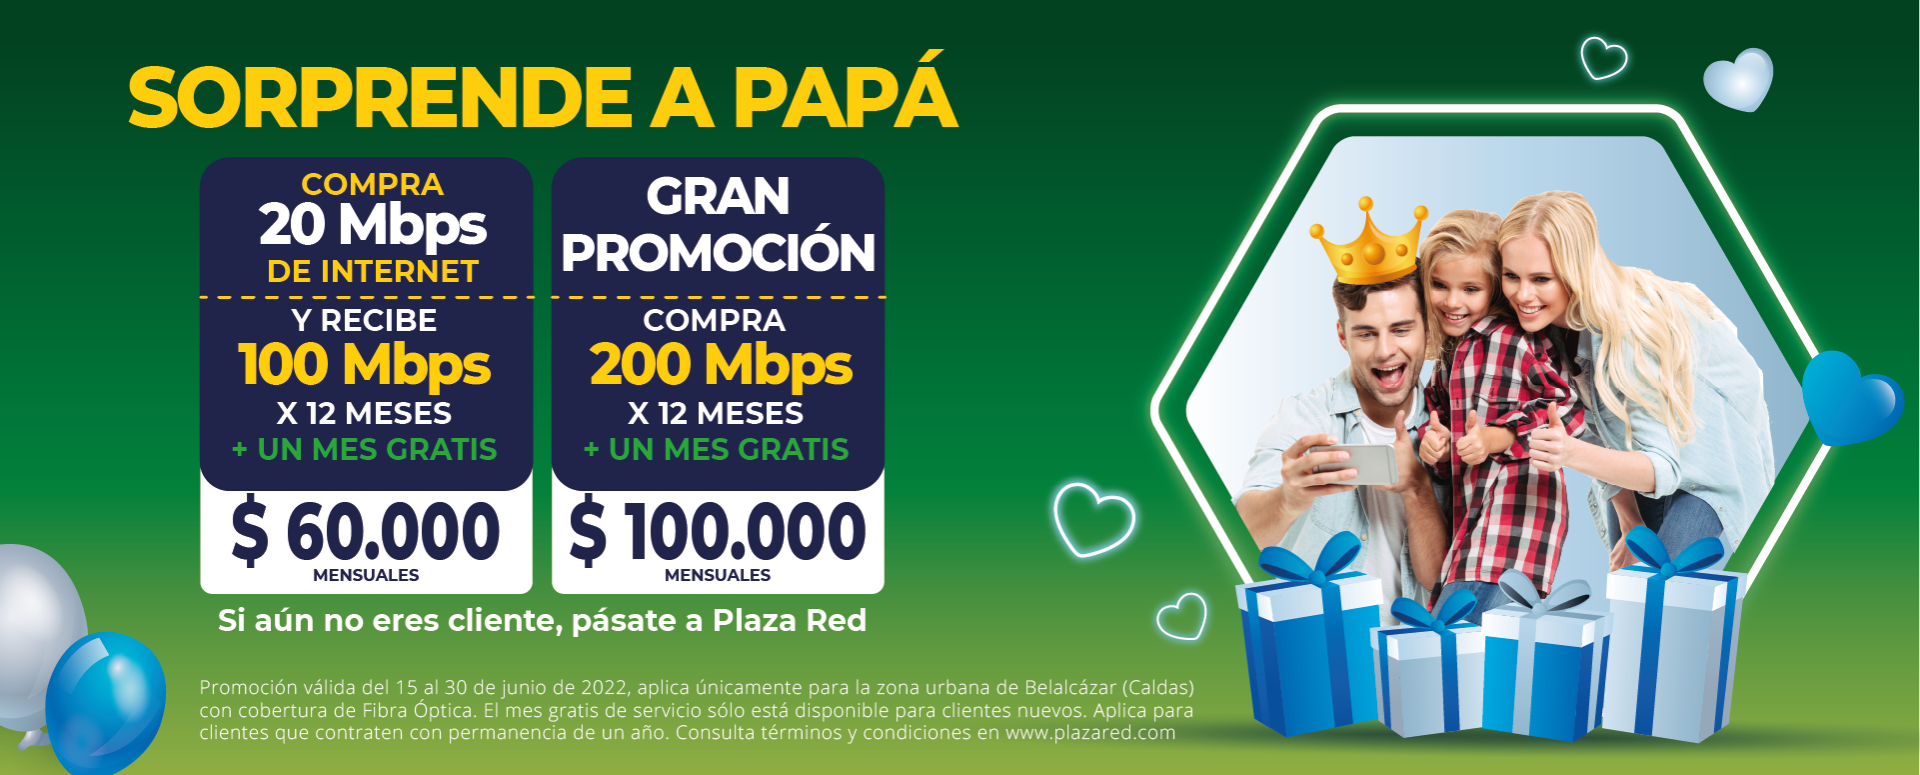 https://plazared.com/wp-content/uploads/2022/06/Banner-promo-papa-1920x775.png